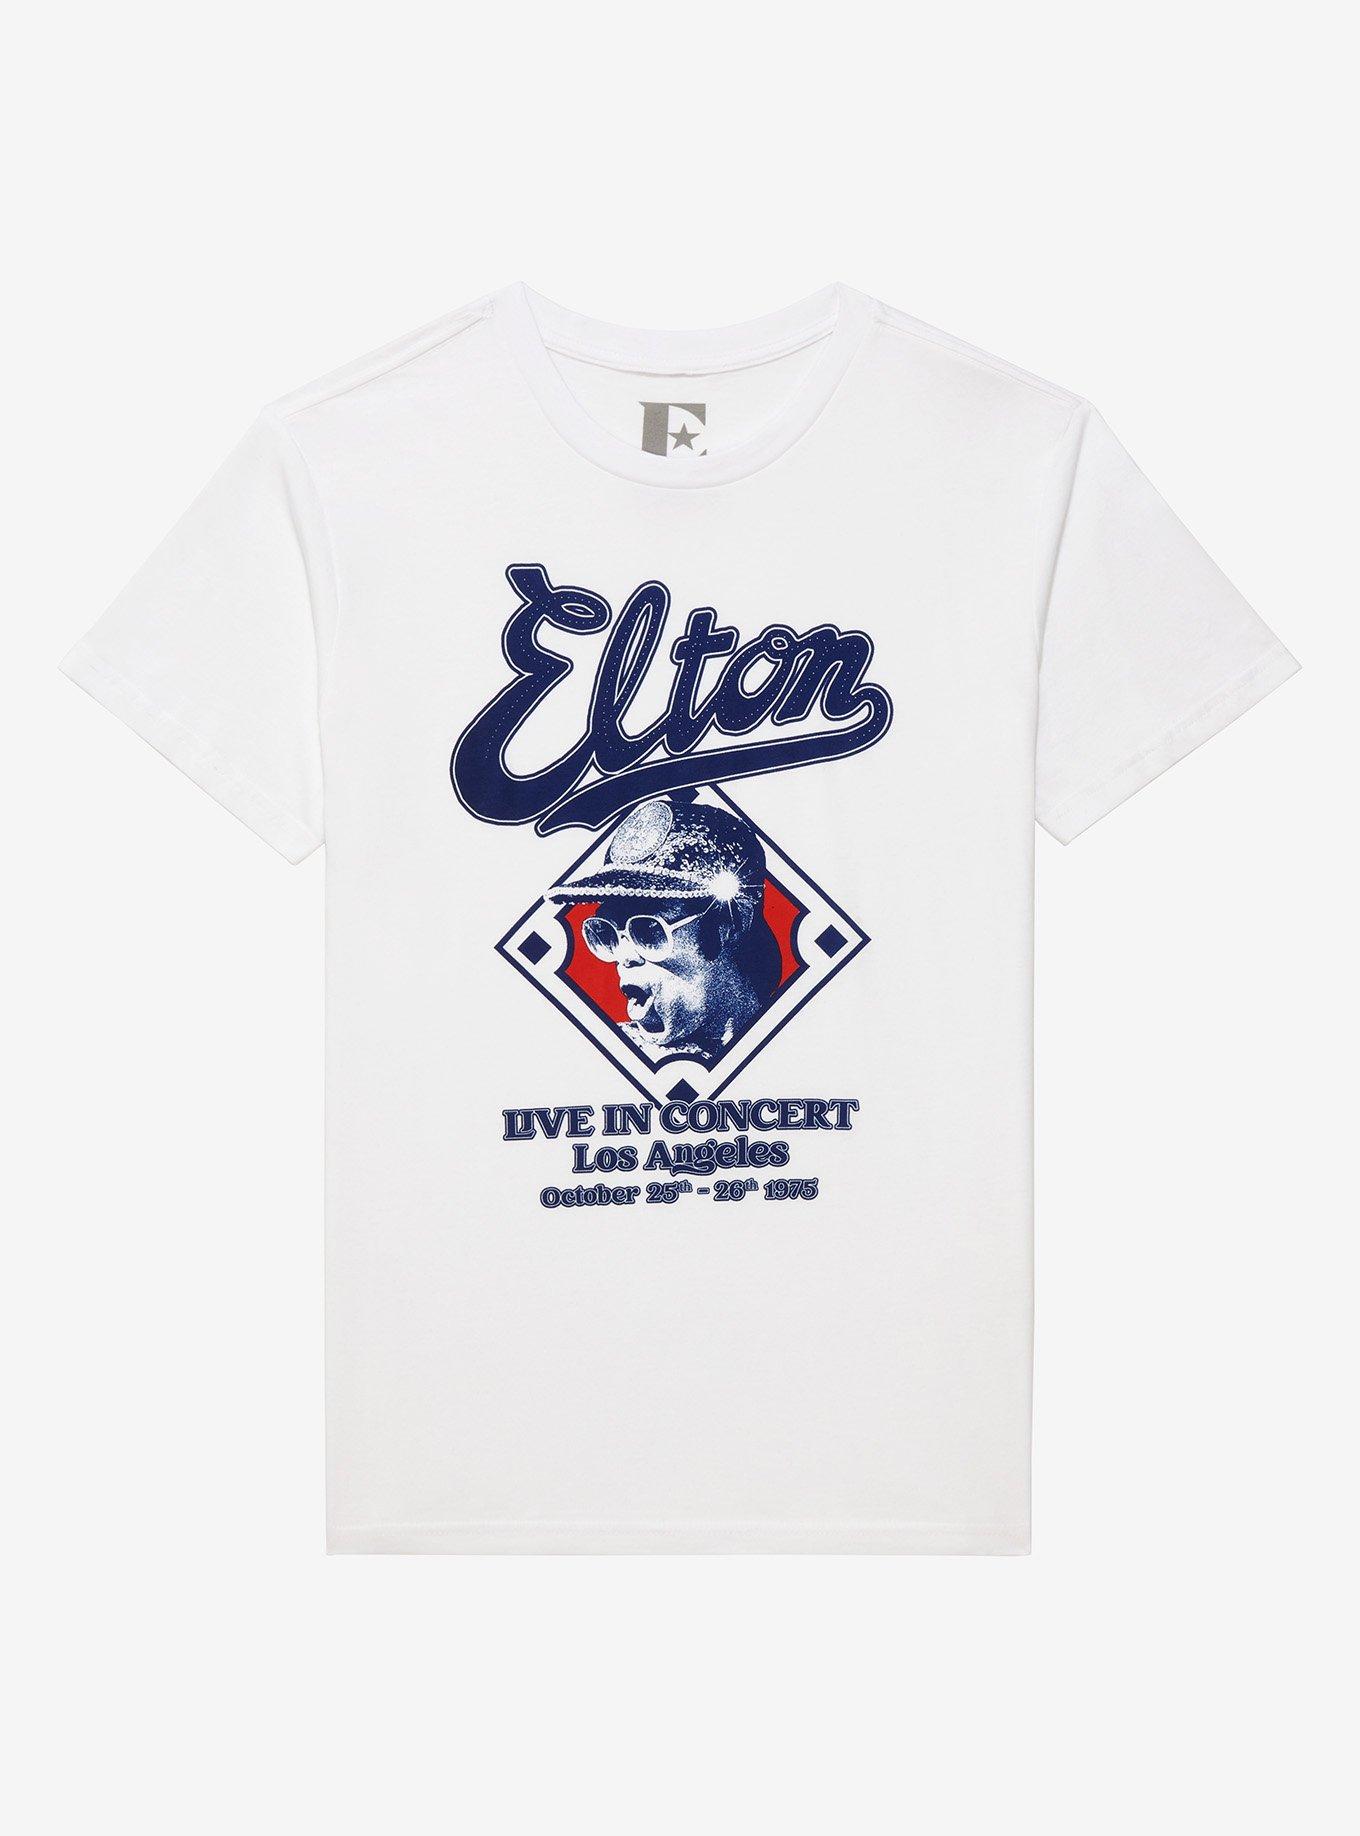 Lids Los Angeles Dodgers Girls Youth Ball Striped T-Shirt - White